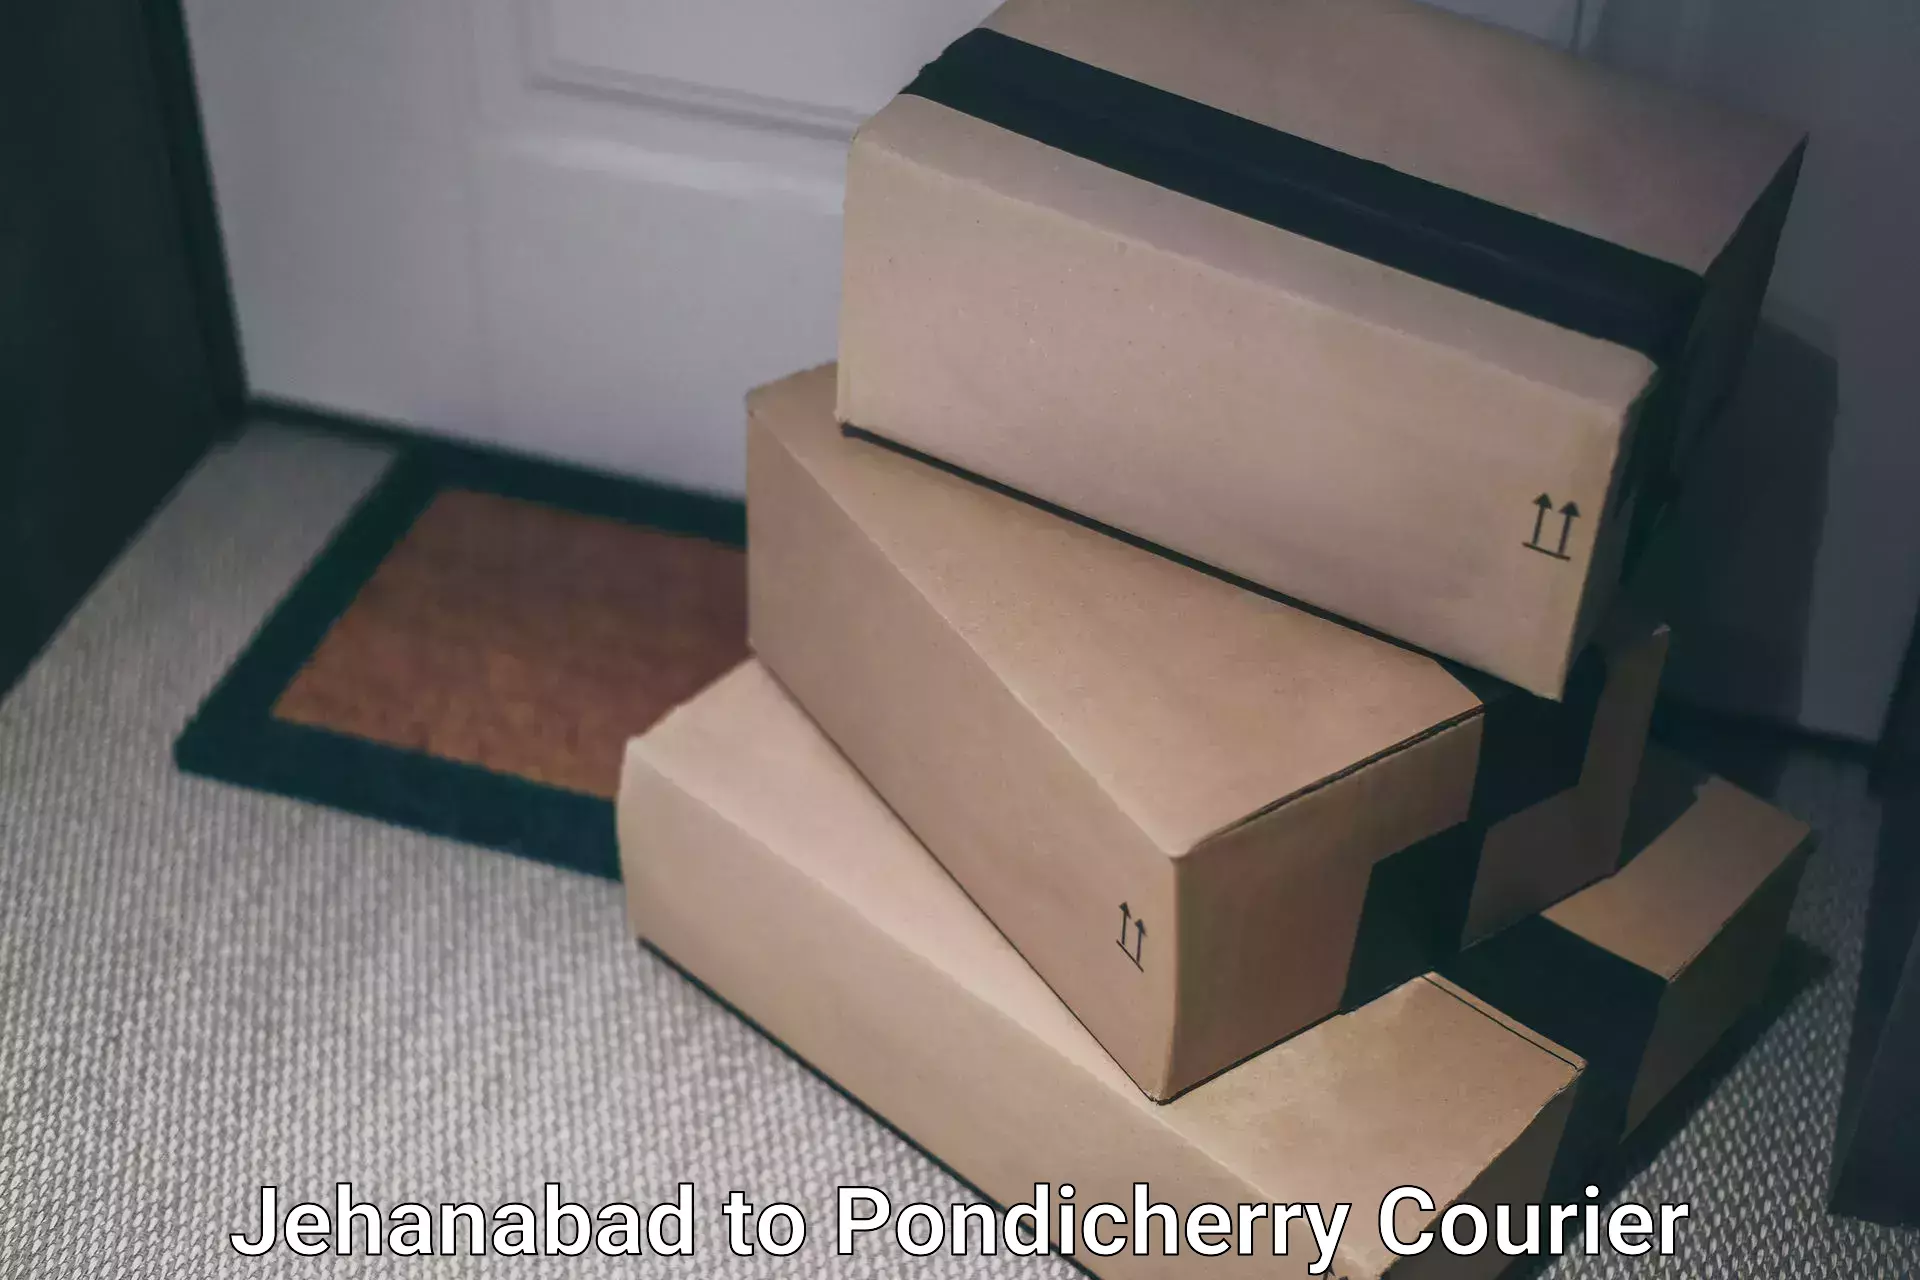 24-hour courier service Jehanabad to Pondicherry